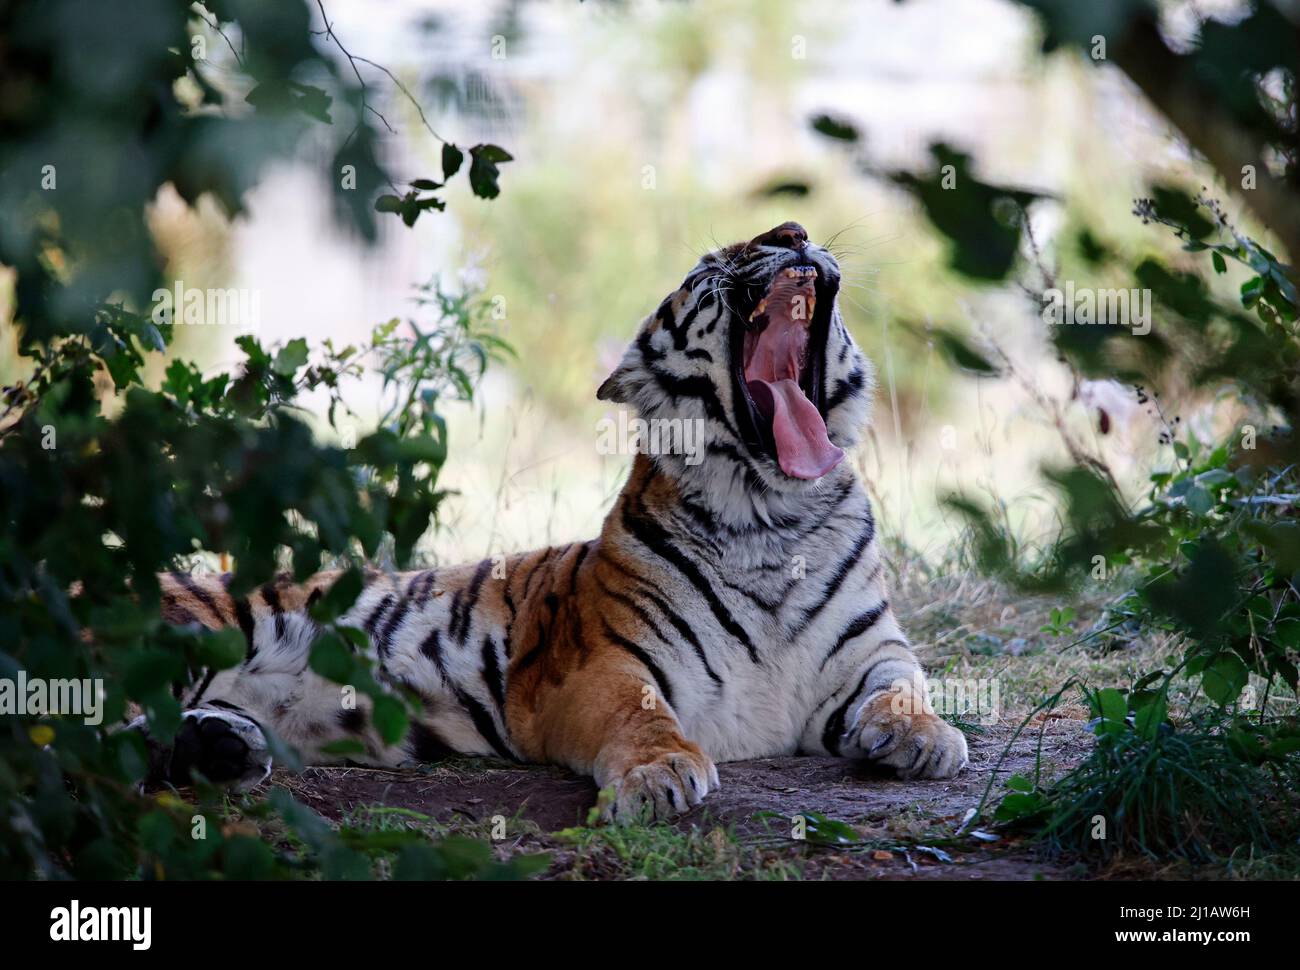 An Amur tiger relaxing in the shade Stock Photo